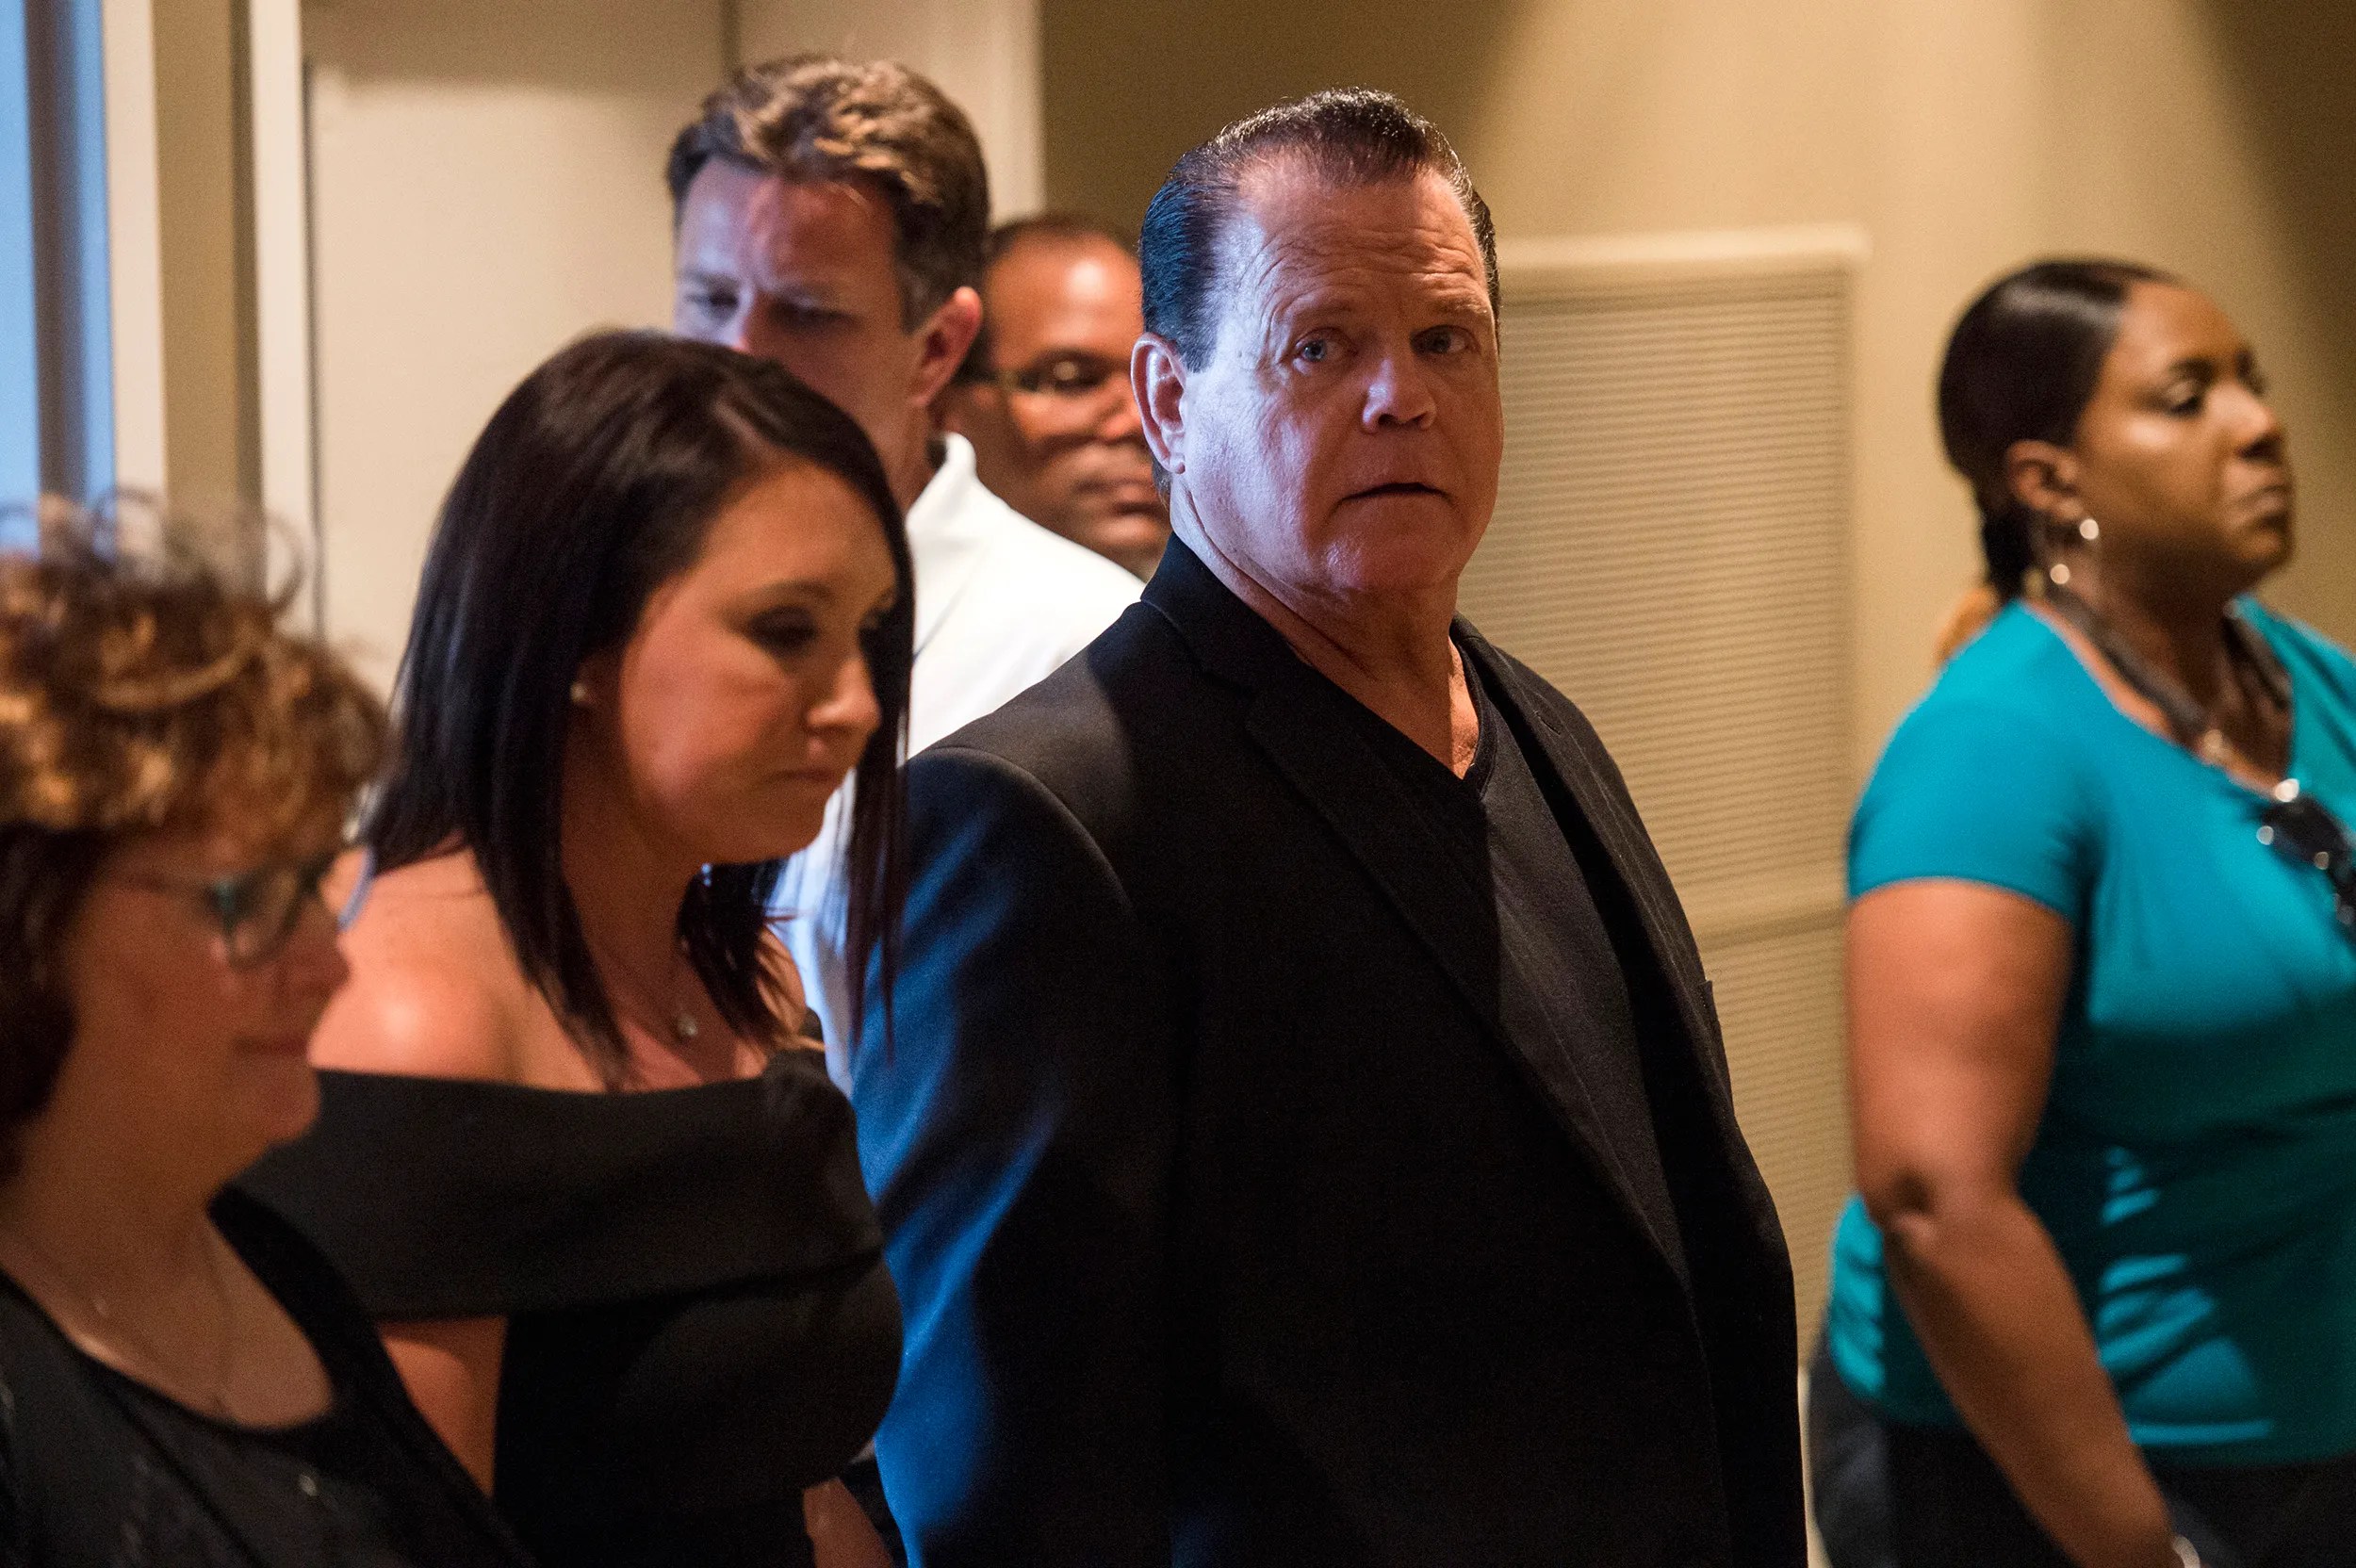 Jerry Lawler talks through details of son's death